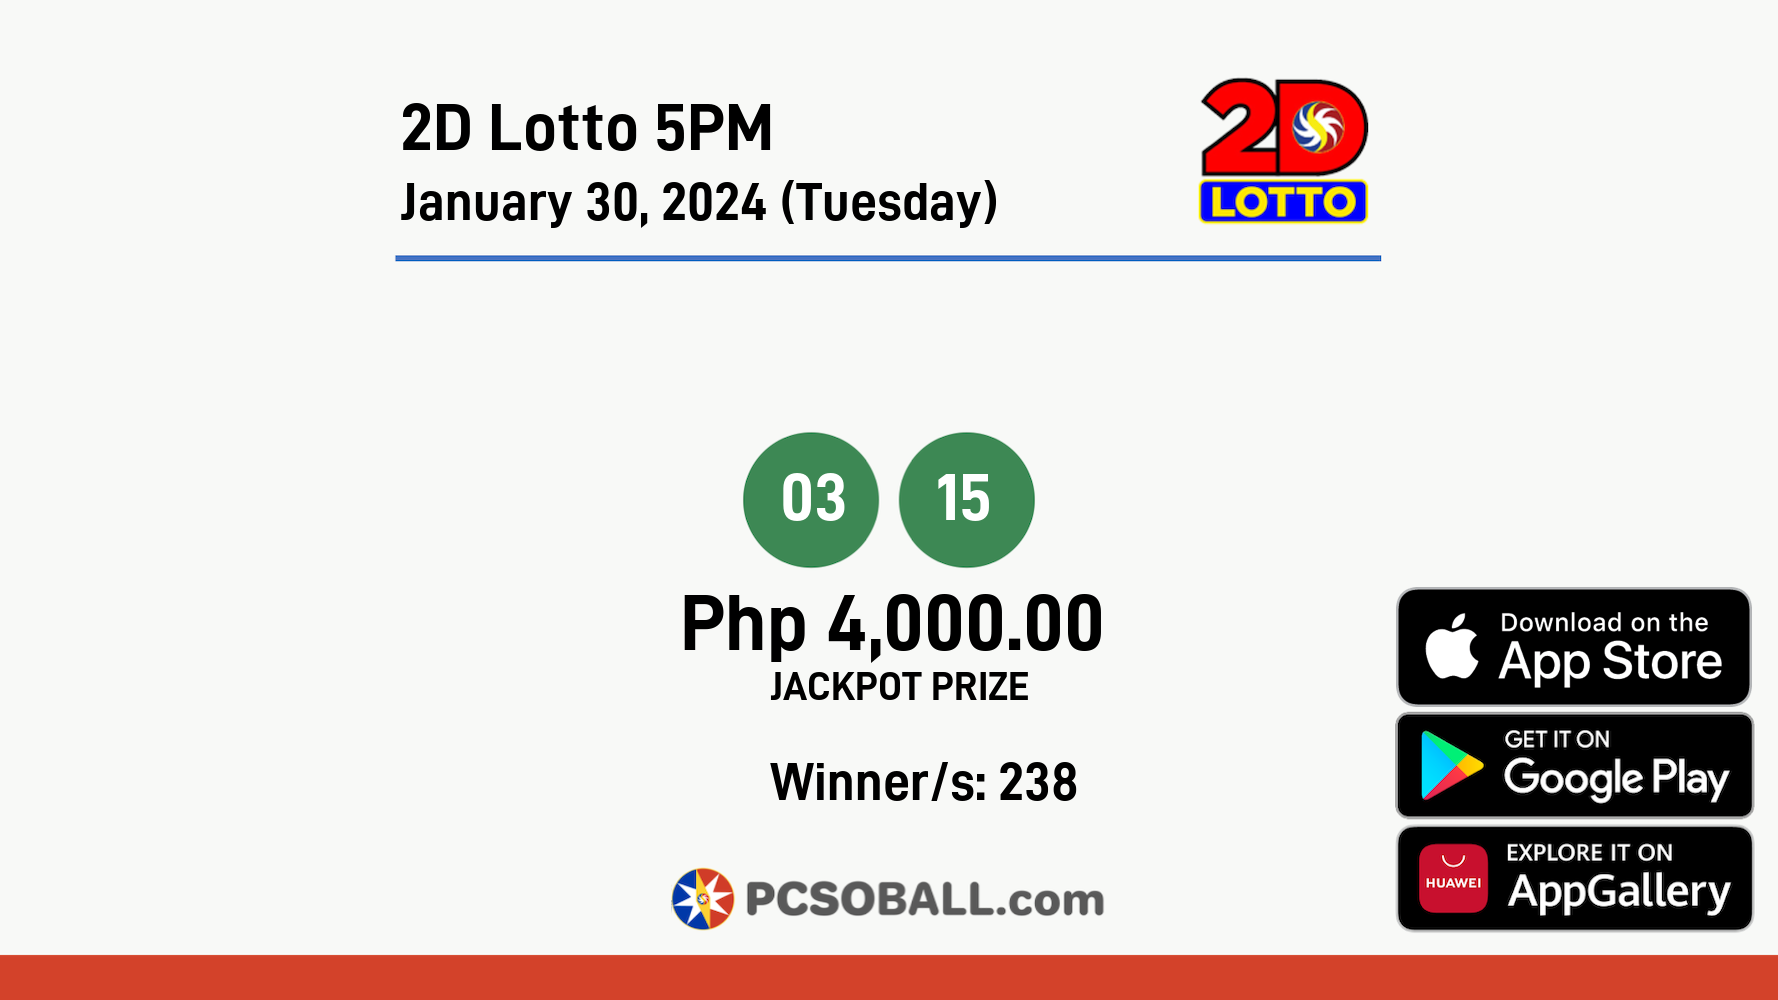 2D Lotto 5PM January 30, 2024 (Tuesday) Result